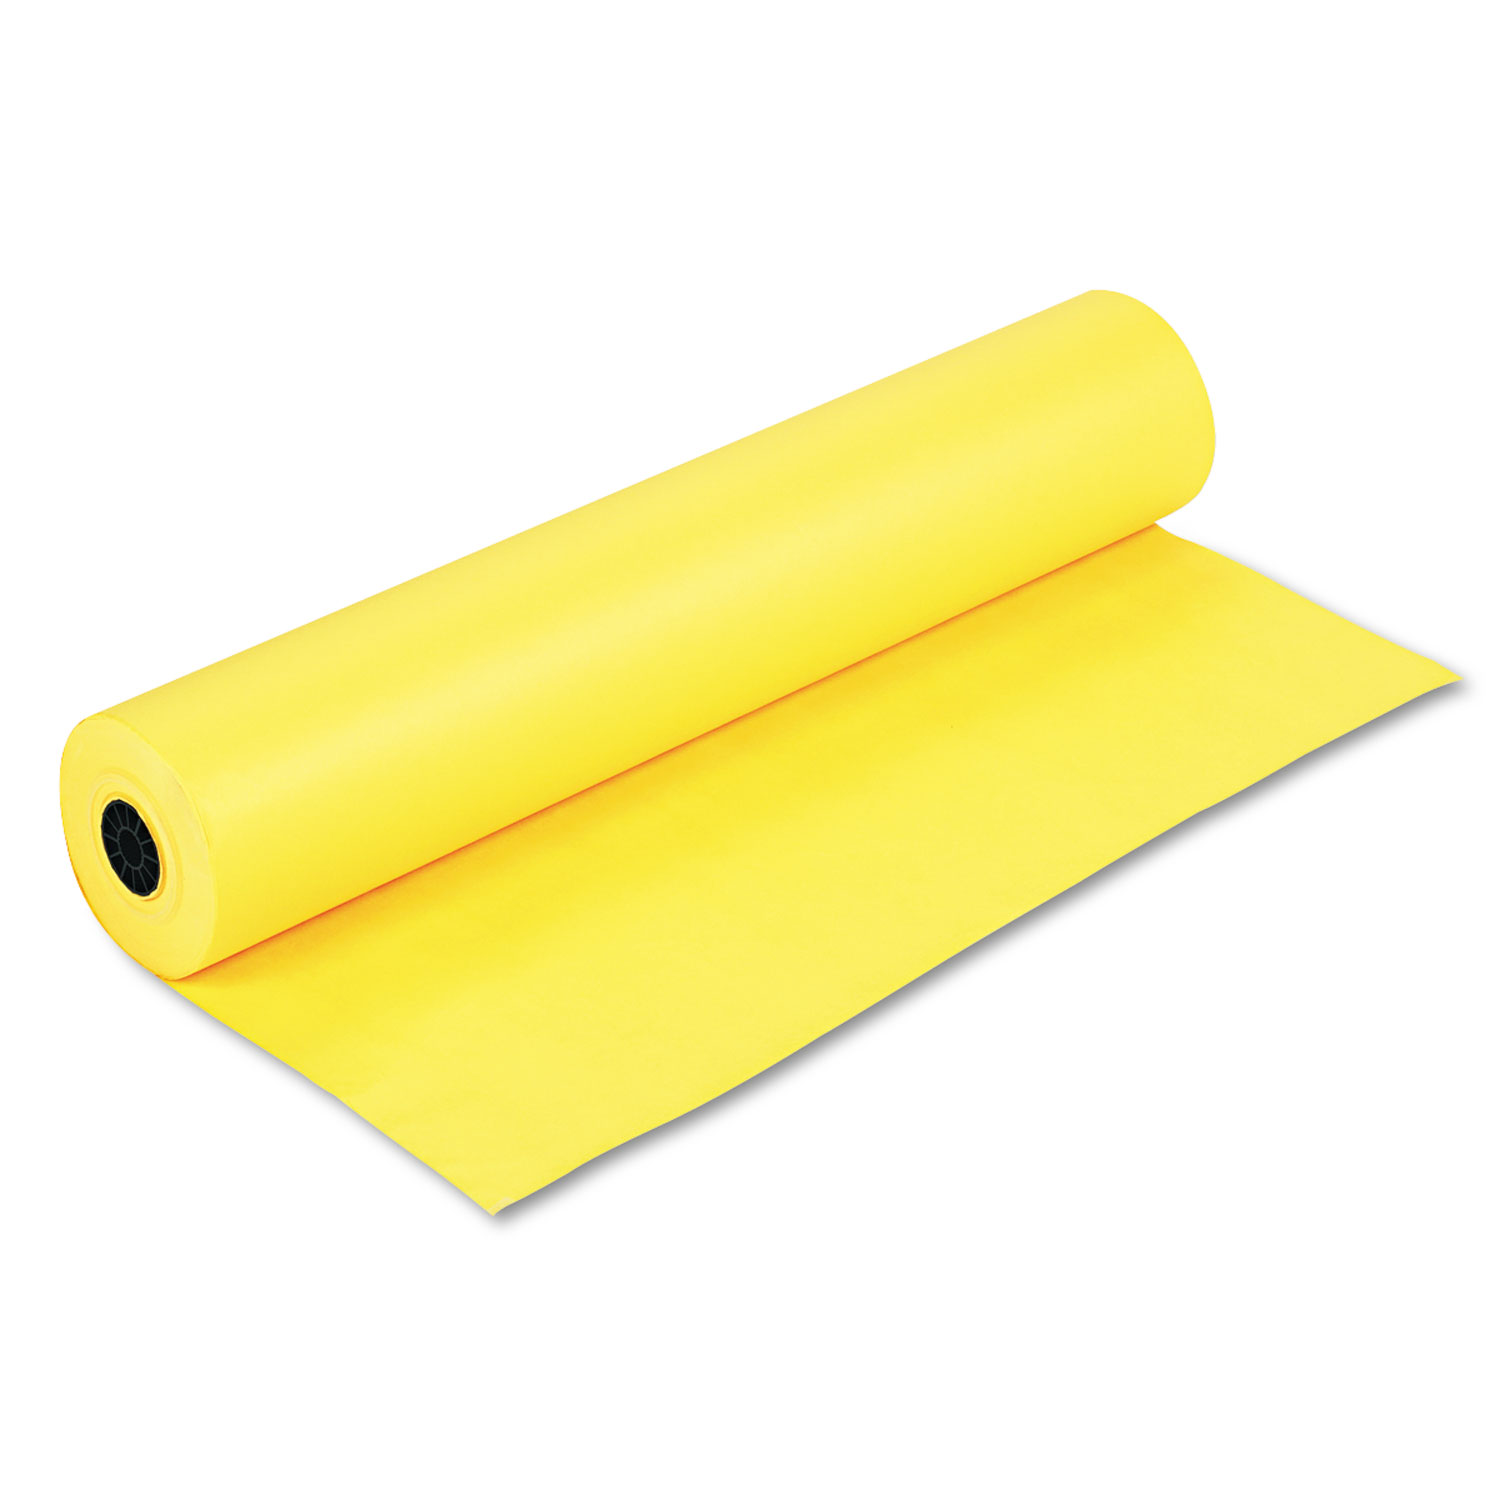 Rainbow Duo-Finish Colored Kraft Paper, 35 lbs., 36 x 1000 ft, Canary